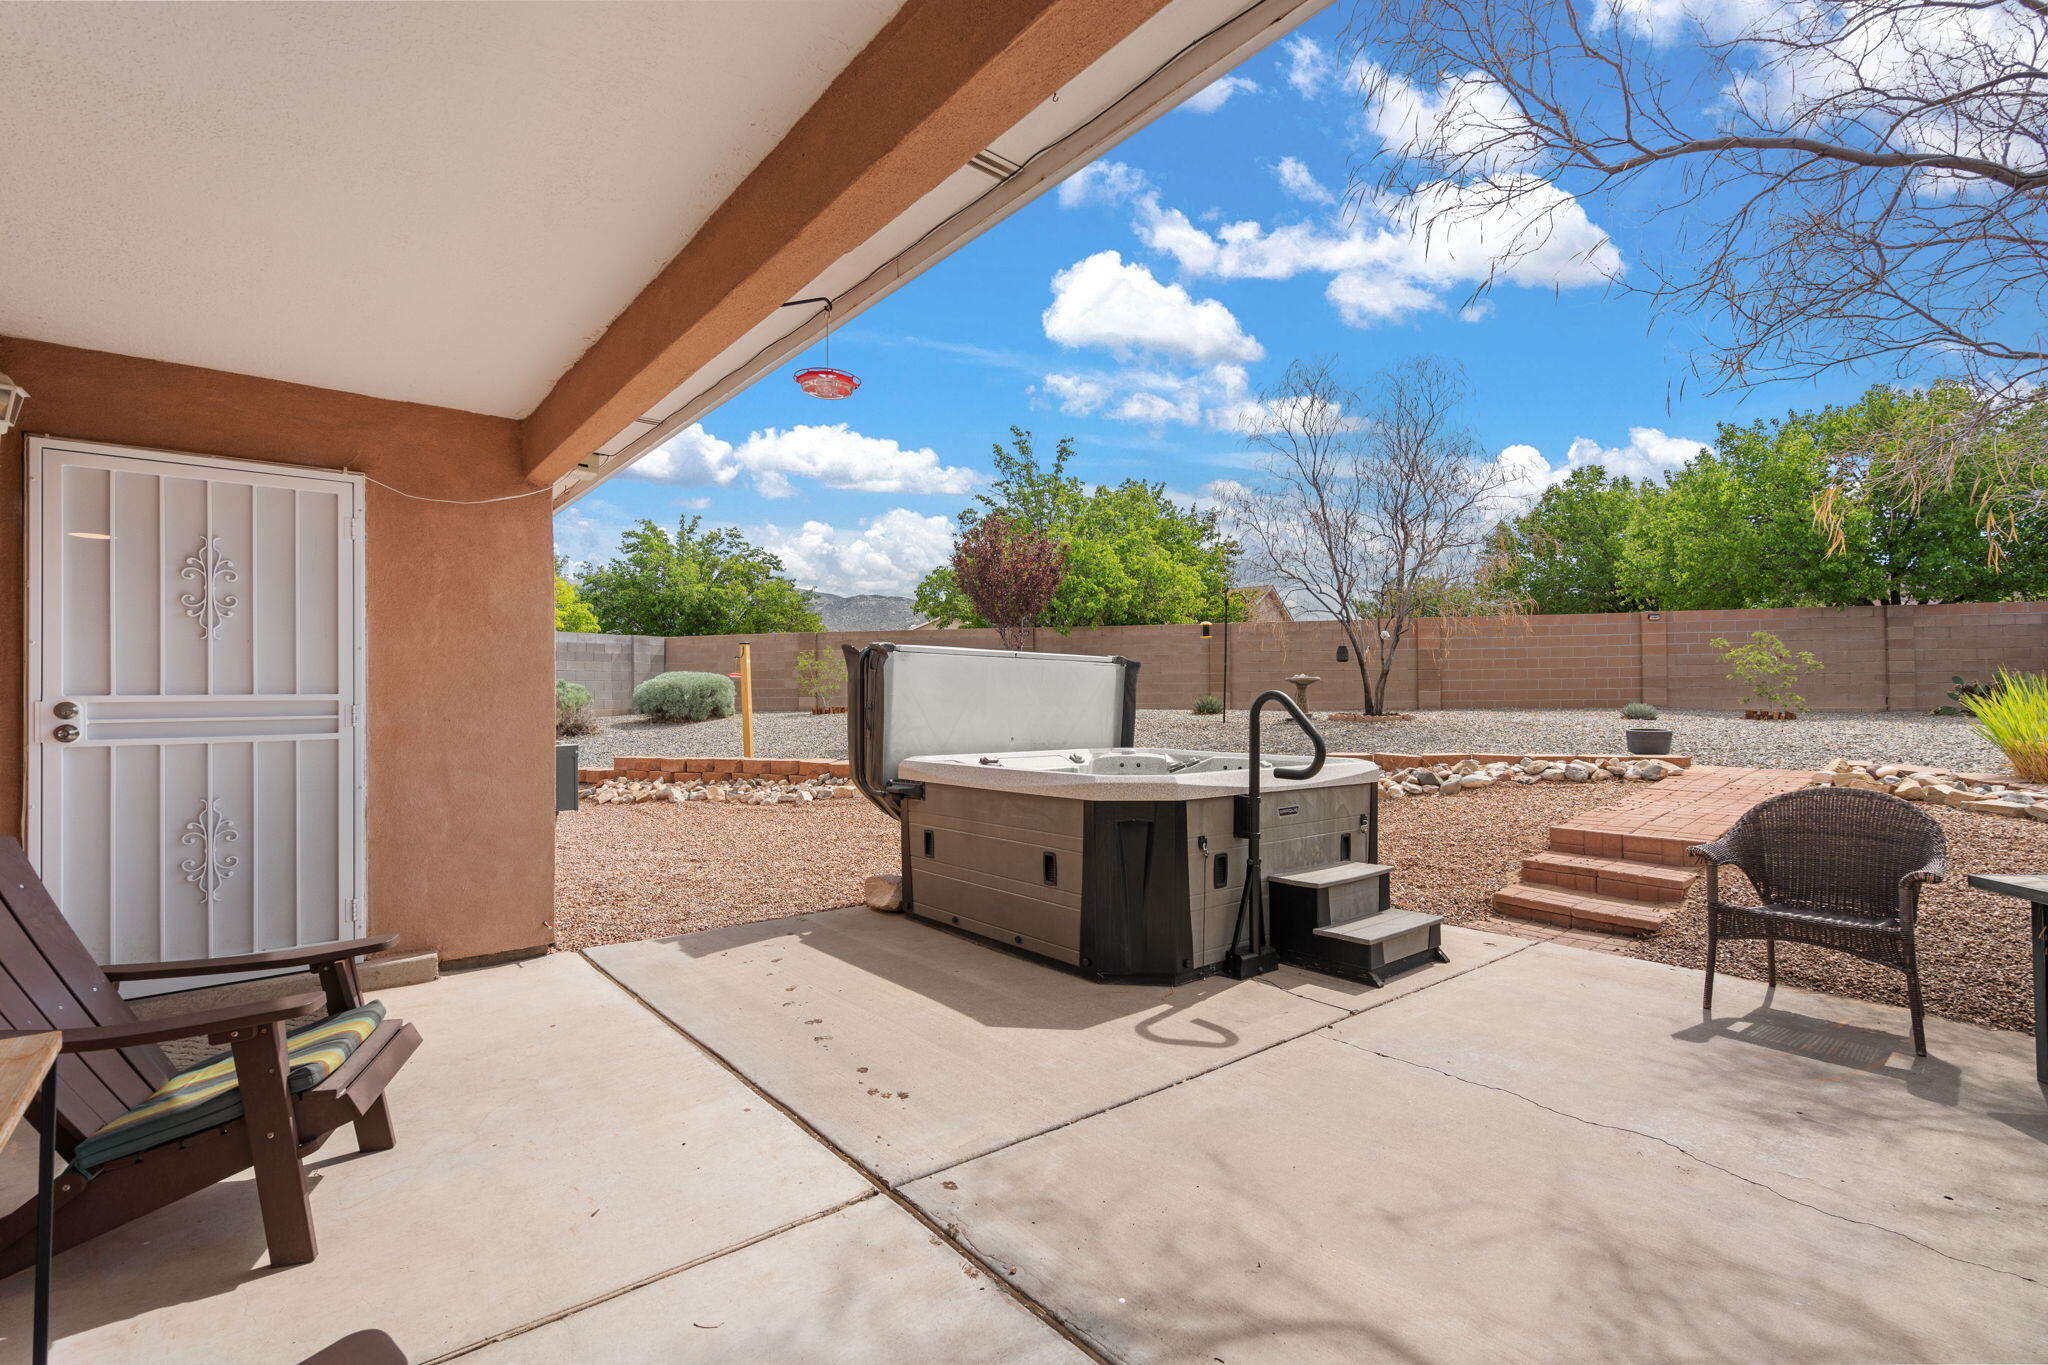 11224 Deer Lodge Place SE, Albuquerque, New Mexico 87123, 3 Bedrooms Bedrooms, ,2 BathroomsBathrooms,Residential,For Sale,11224 Deer Lodge Place SE,1061393